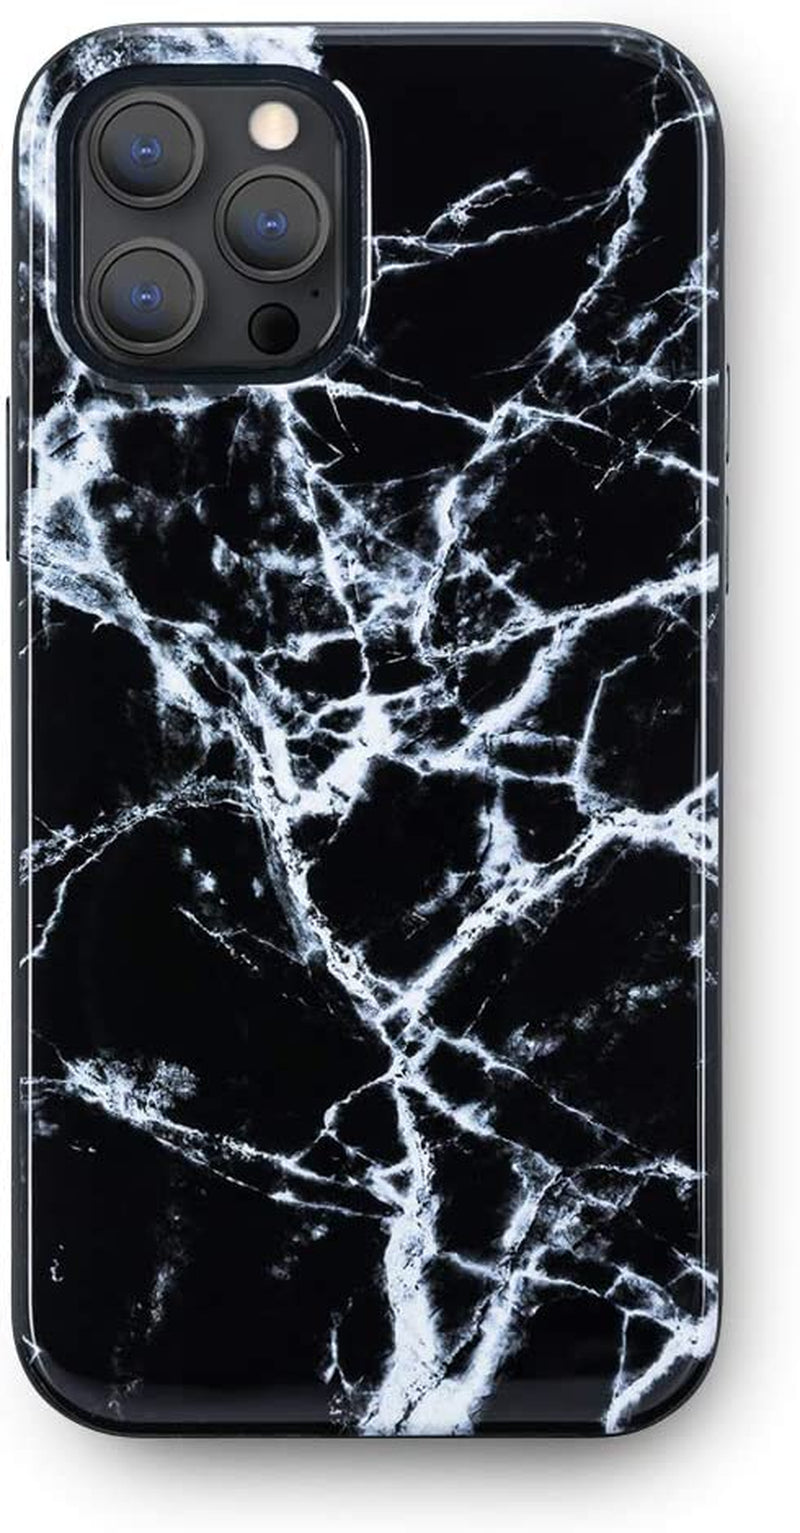 - Iphone 12 Pro Max Case - Stylish Black Polished Marble Phone Cover - Anti-Scratch, Wireless Charging Compatible, 360° Shockproof Protective Cases for Apple Iphone 12 Pro Max